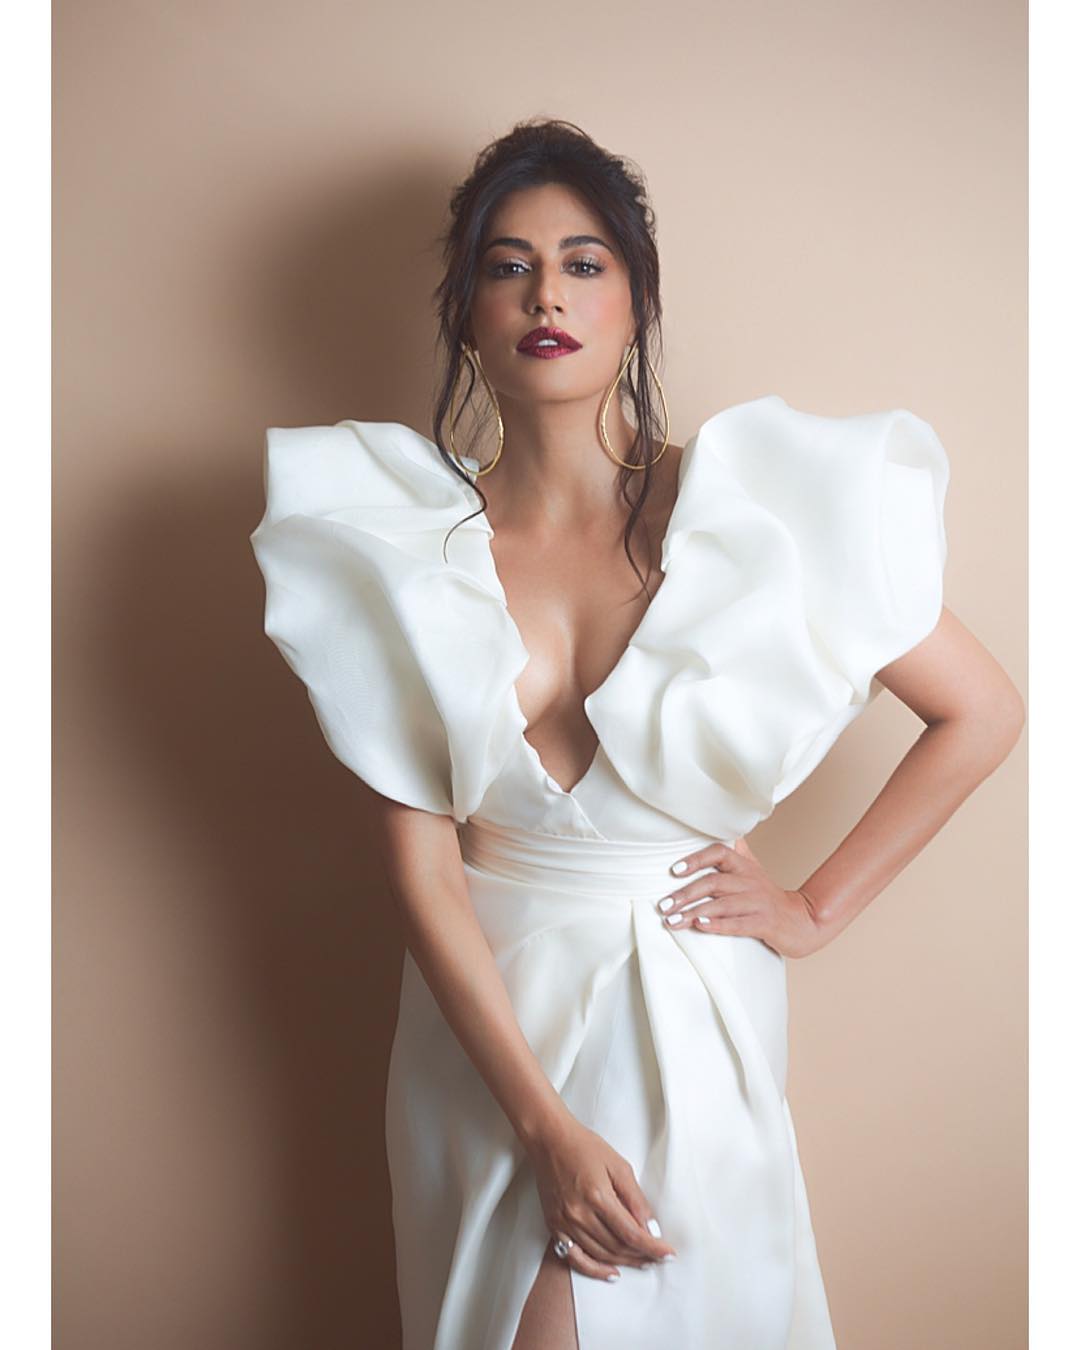 Chitrangda Singh is too hot to handle a white gown with ruffle sleeves